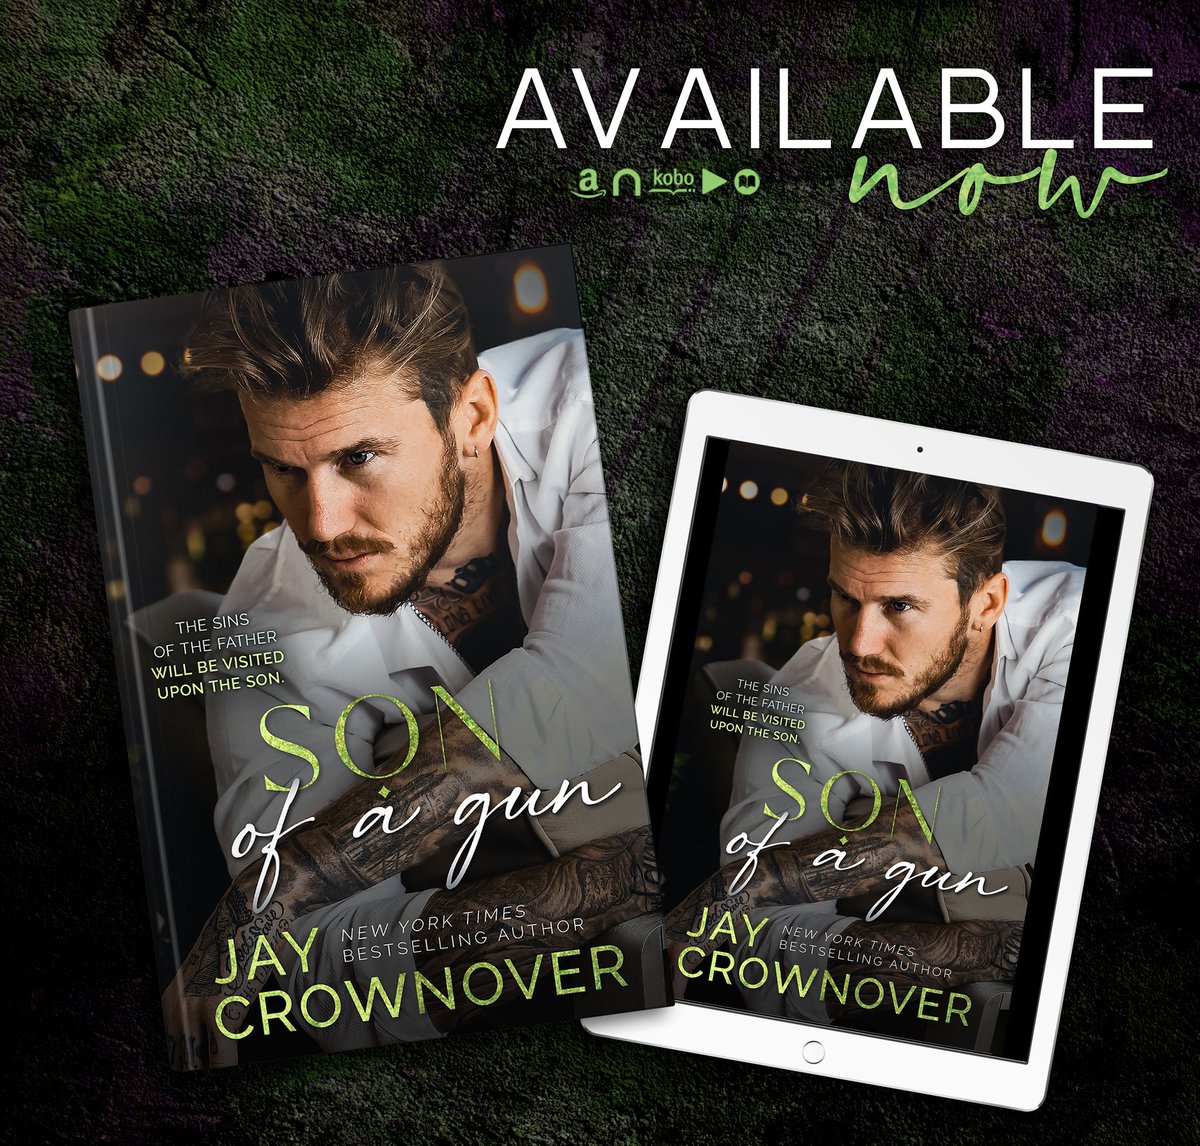 𝐒𝐨𝐧 𝐨𝐟 𝐚 𝐆𝐮𝐧 by NY Times & USA Today bestselling author Jay Crownover is LIVE!! Universal 💚

Link: books2read.com/SOG-JC

#NowAvailable #SonOfAGun #JayCrownover #ForeverMarked
#MarkedMenThePointCrossover #wordsmithpublicity